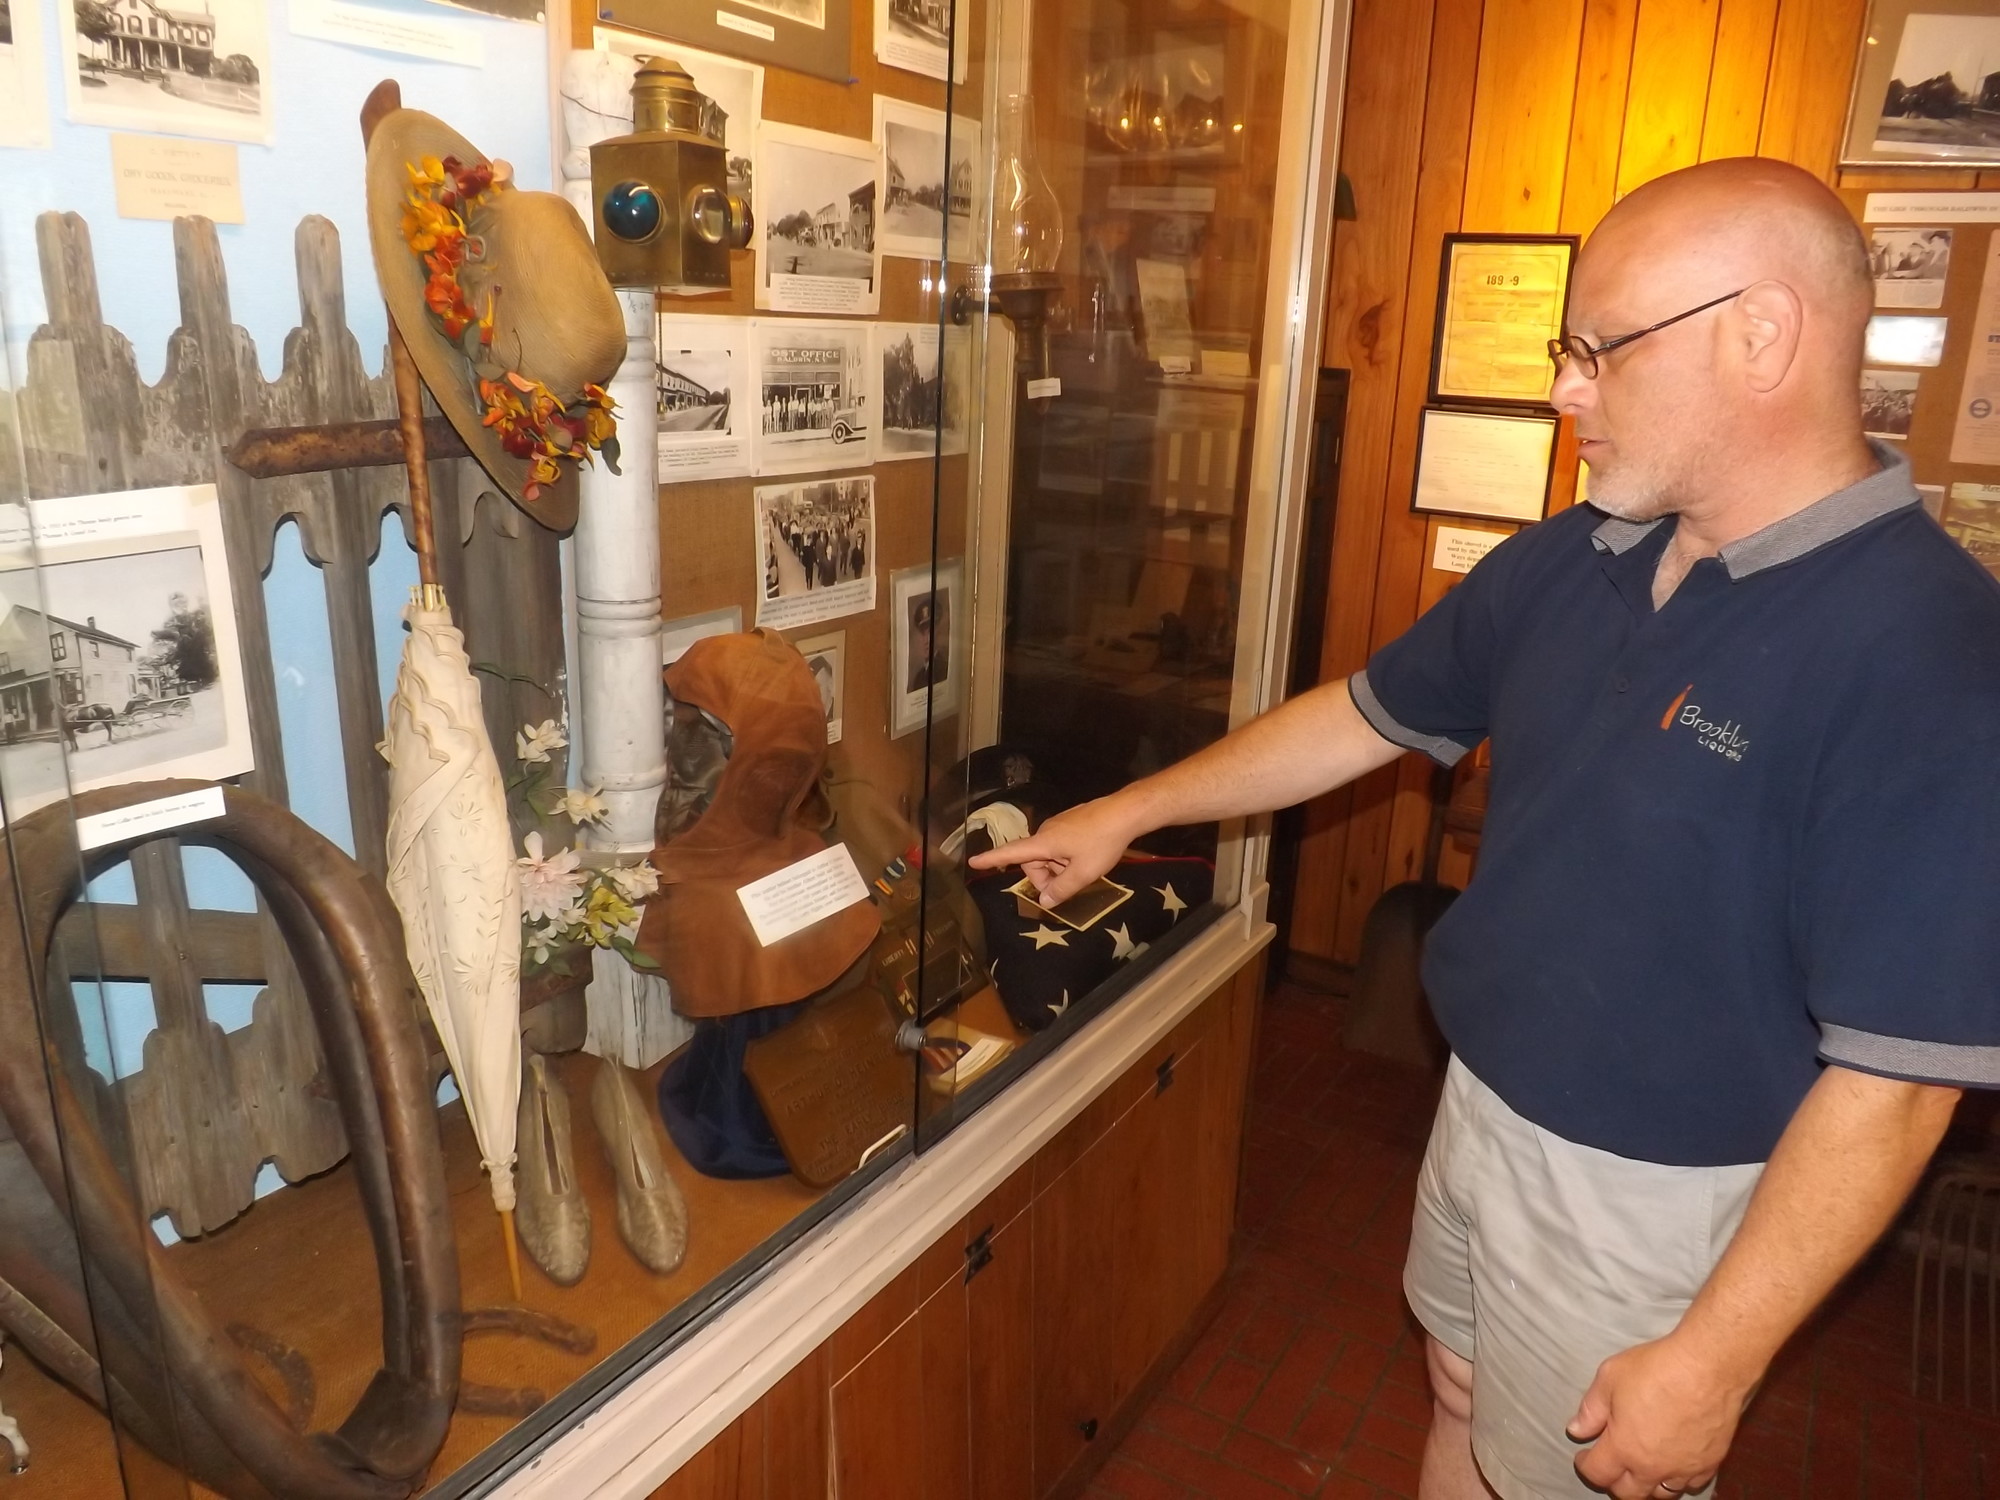 Gary Farkash, president of the Baldwin Historical Society, helped get the museum up and running after it was closed to the public around 2001.